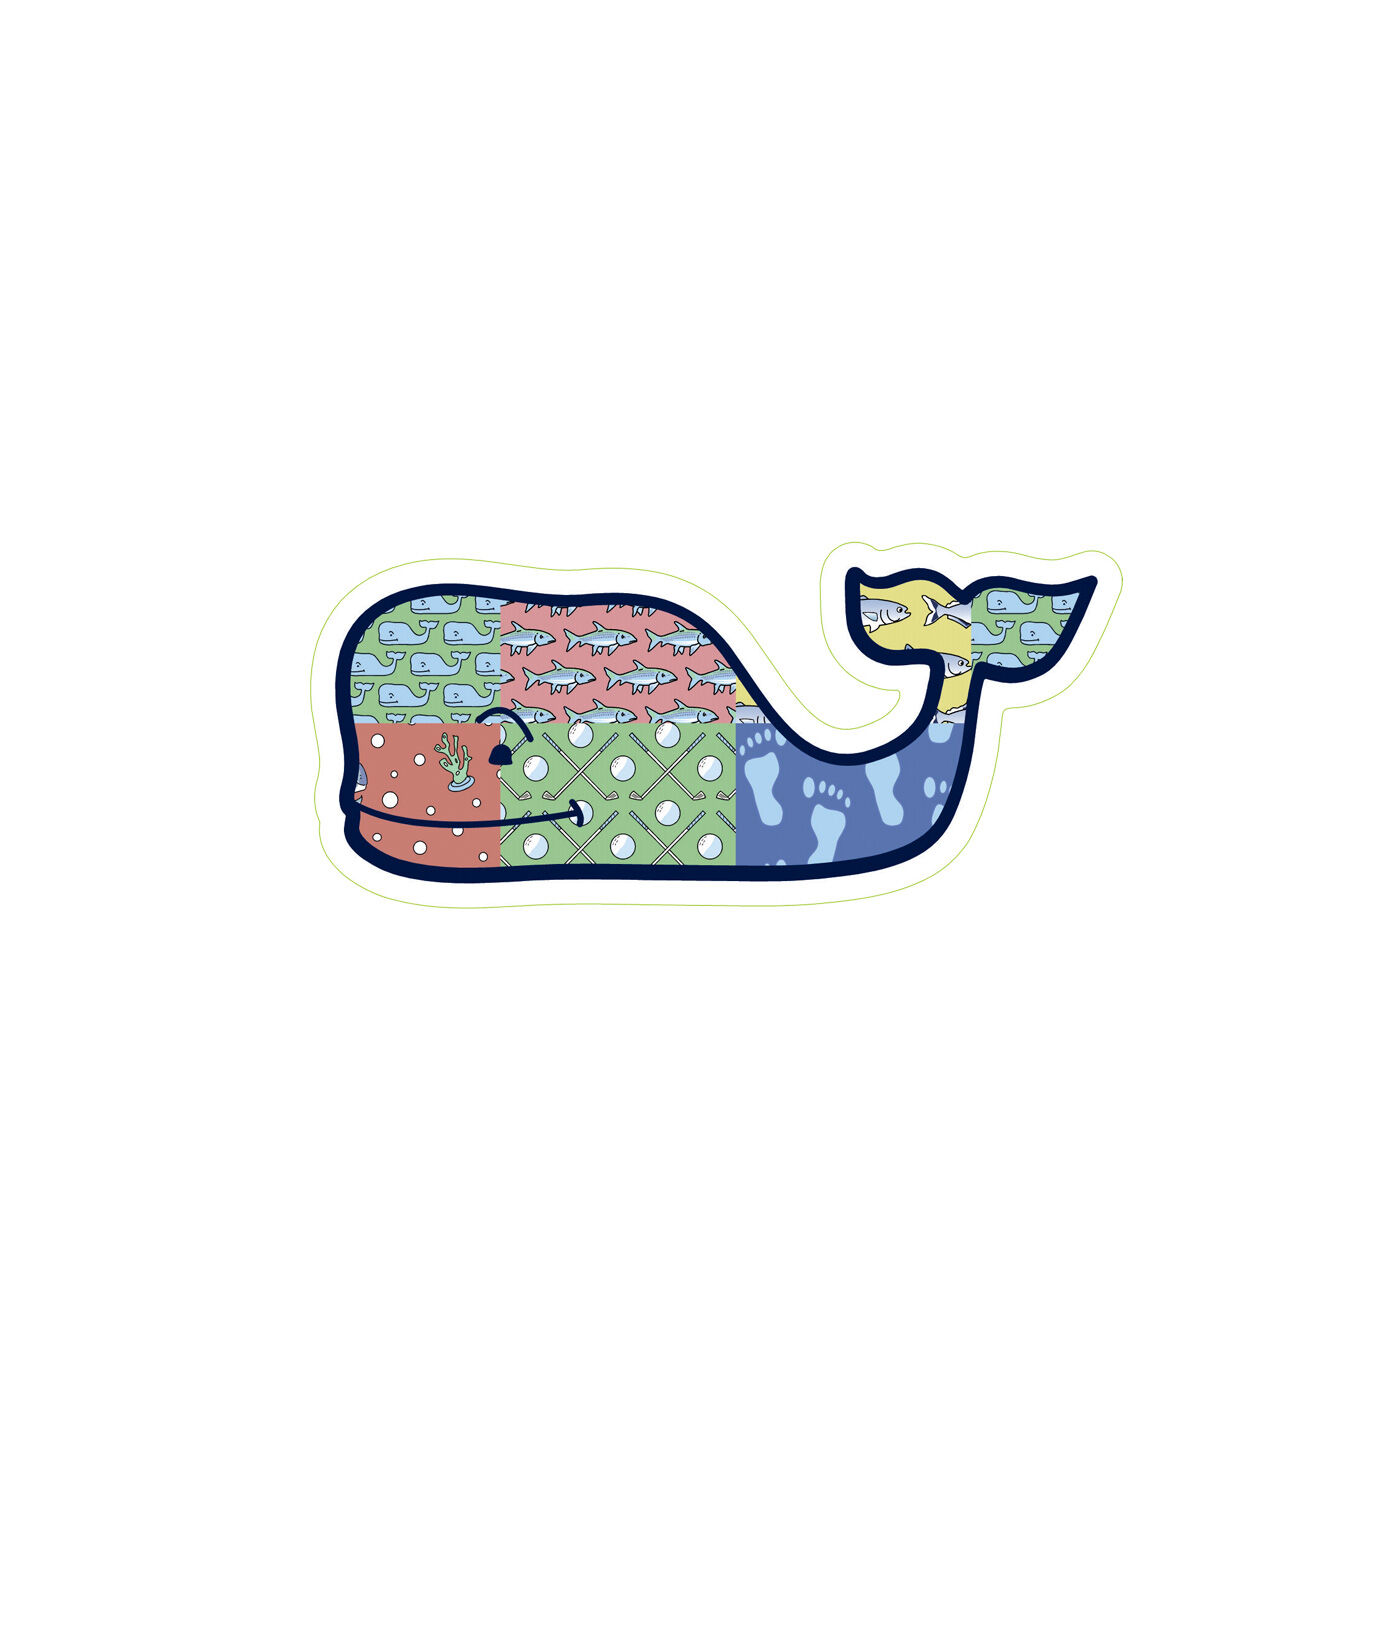 NEW AUTHENTIC VINEYARD VINES PATCHWORK WHALE STICKER DECAL 